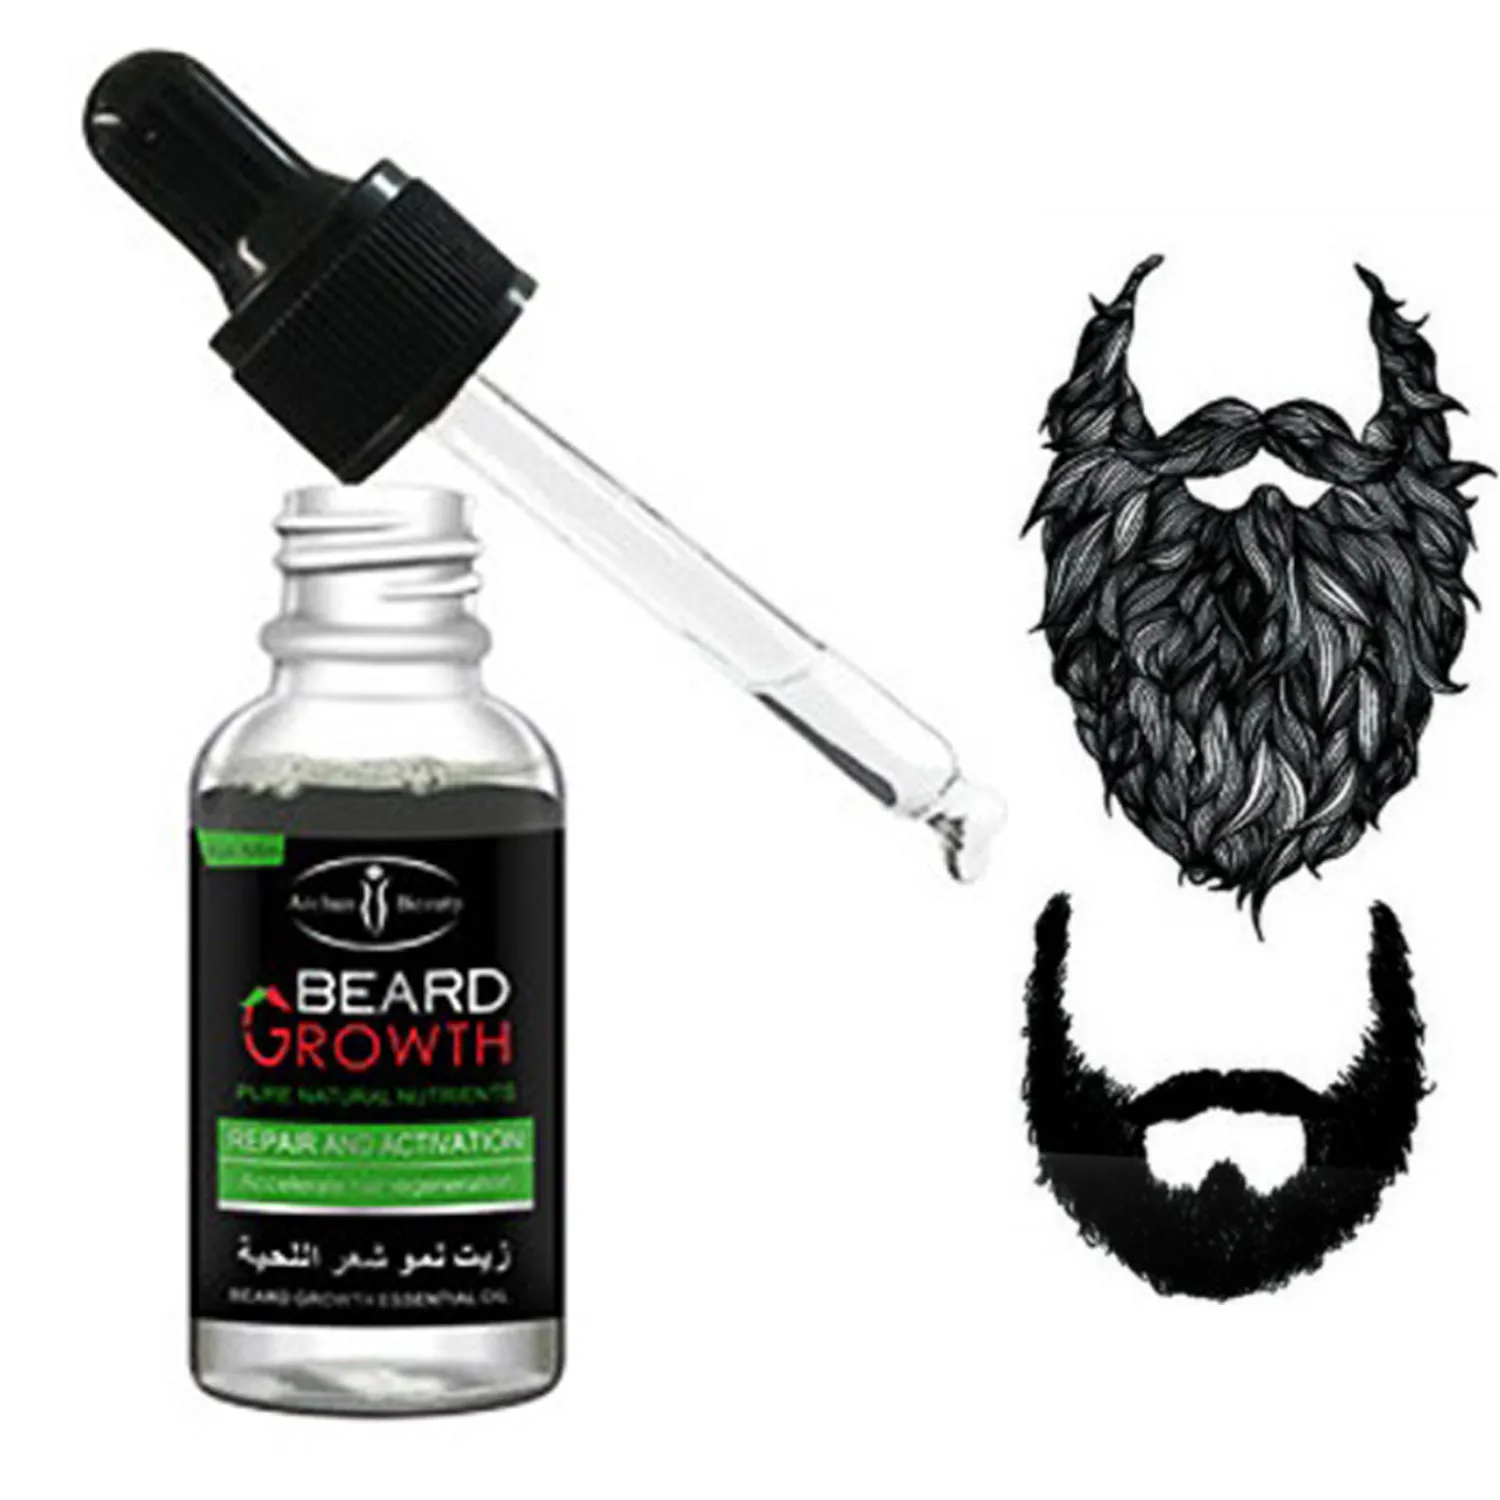 

30ml Beard Growth Oil Beard Wax Balm Hair Loss Products Leave-In Conditioner for Groomed Chest Hair Moustache Oil Beard Care 1pc